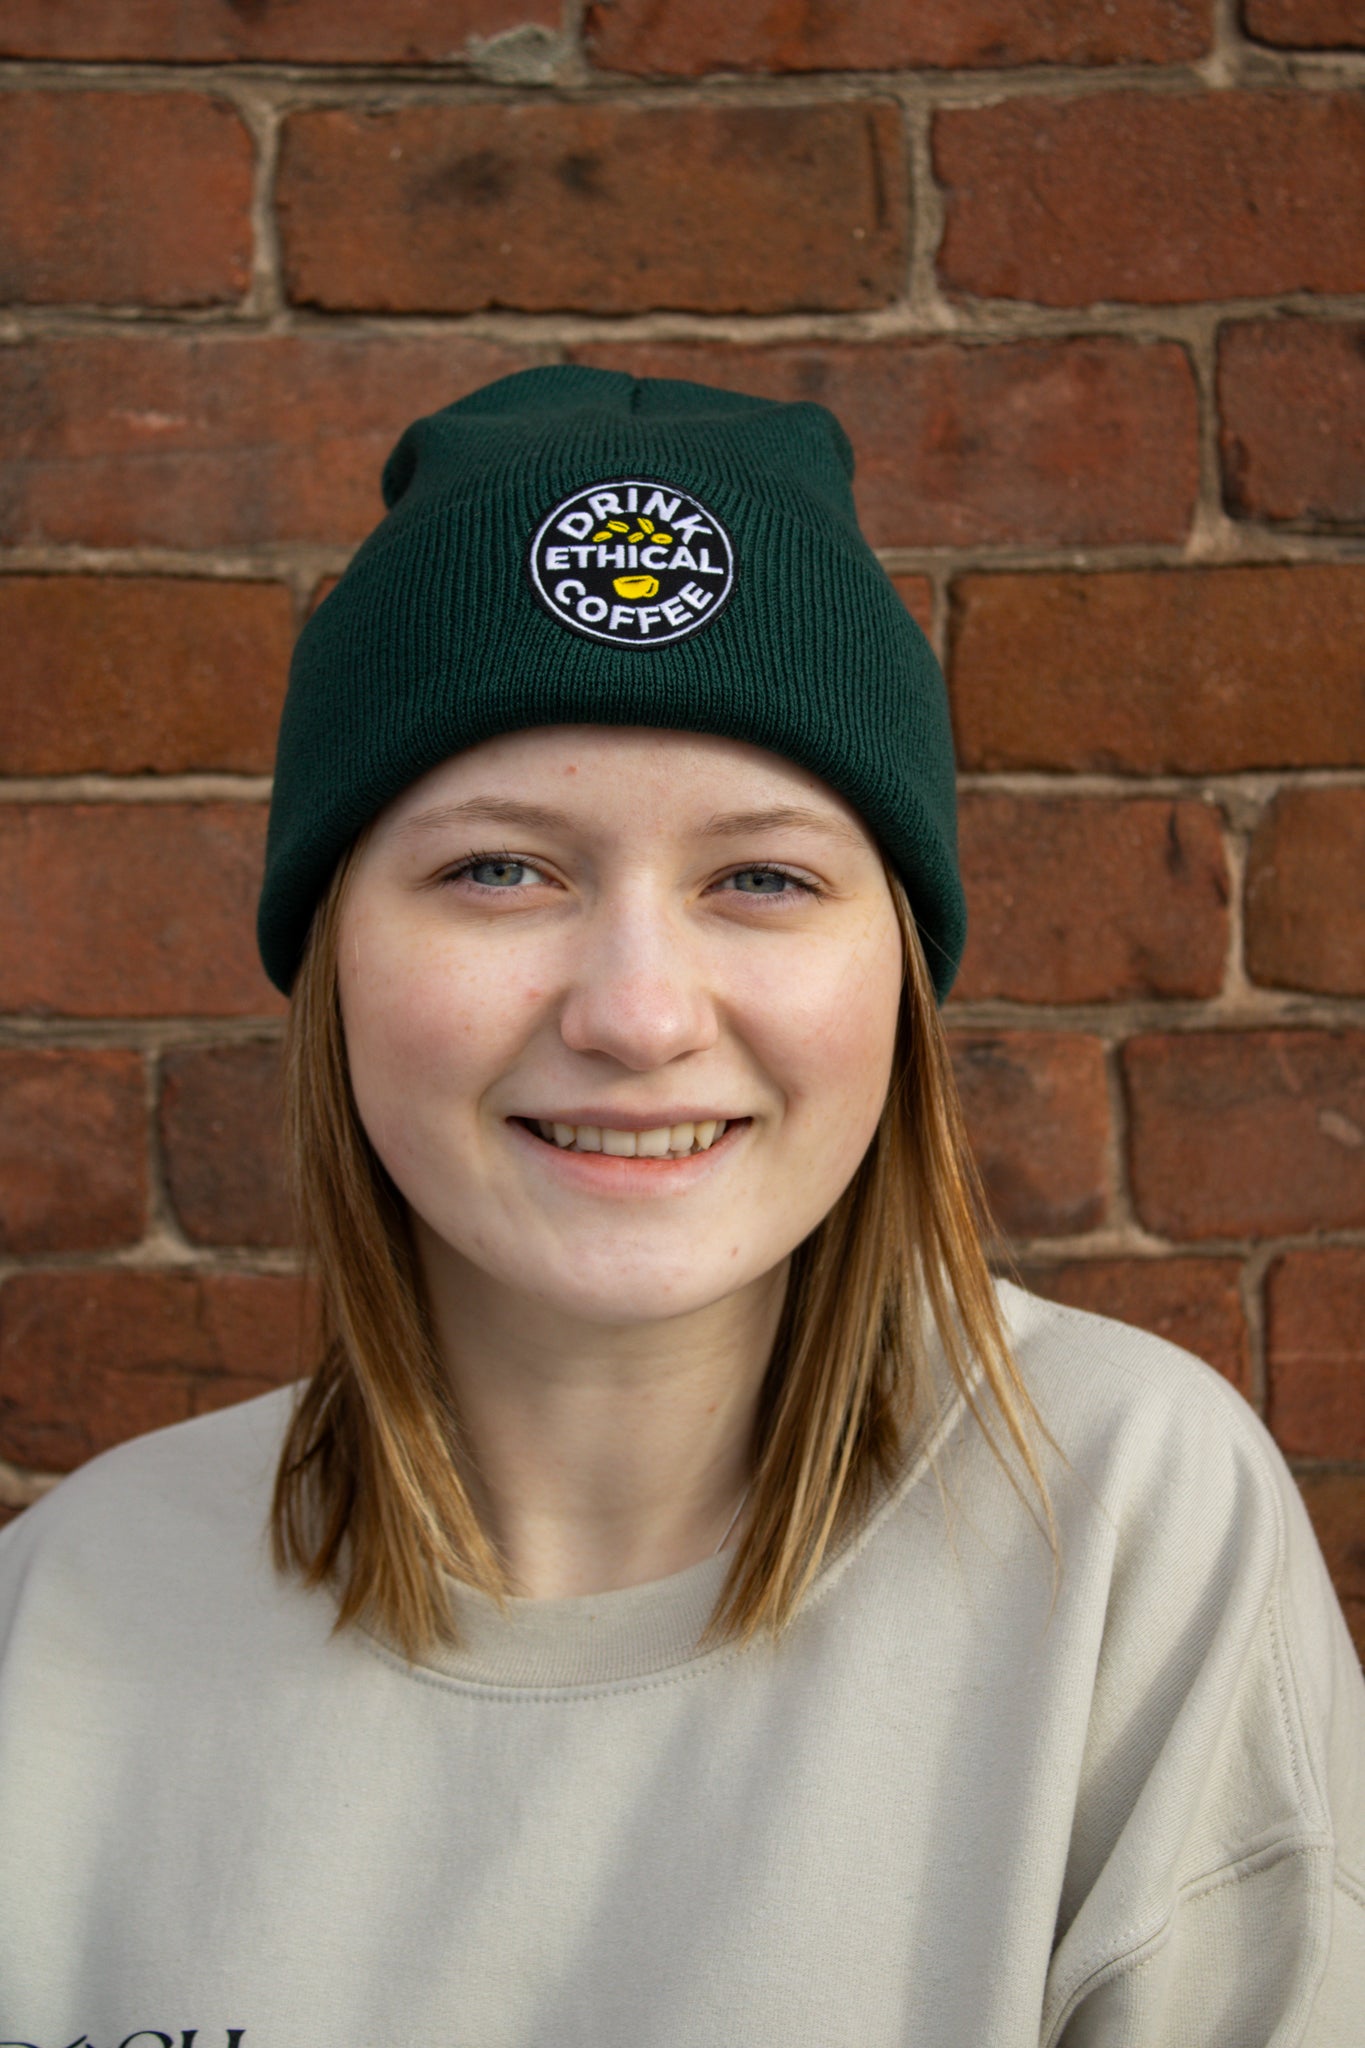 Epoch Toque- "Drink Ethical Coffee"